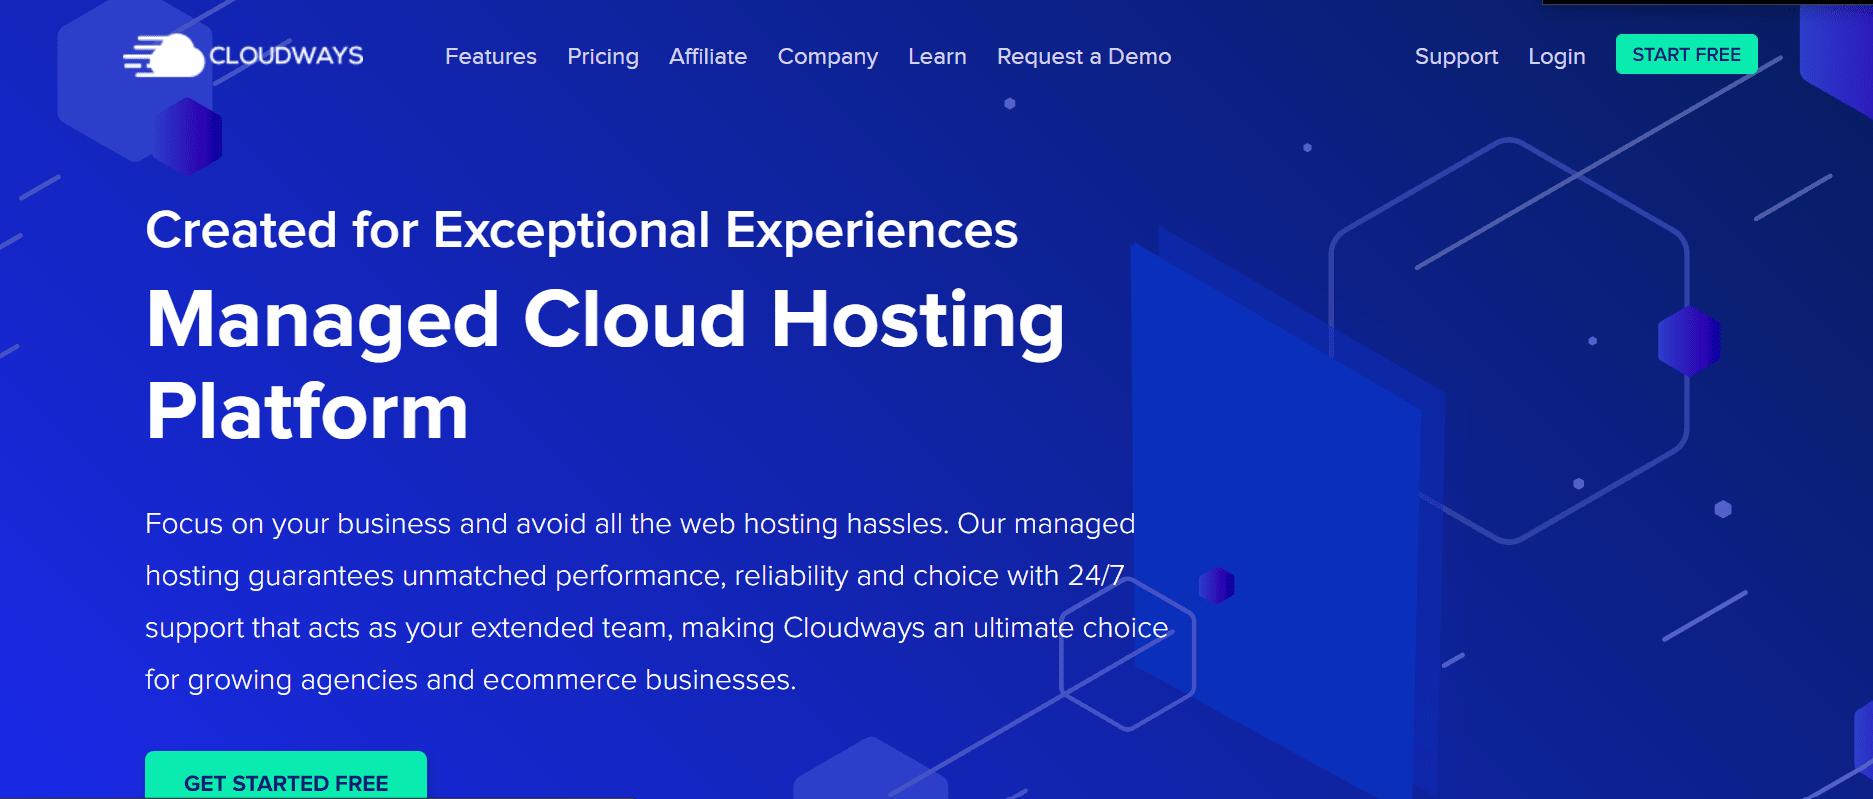 cloudways-overview